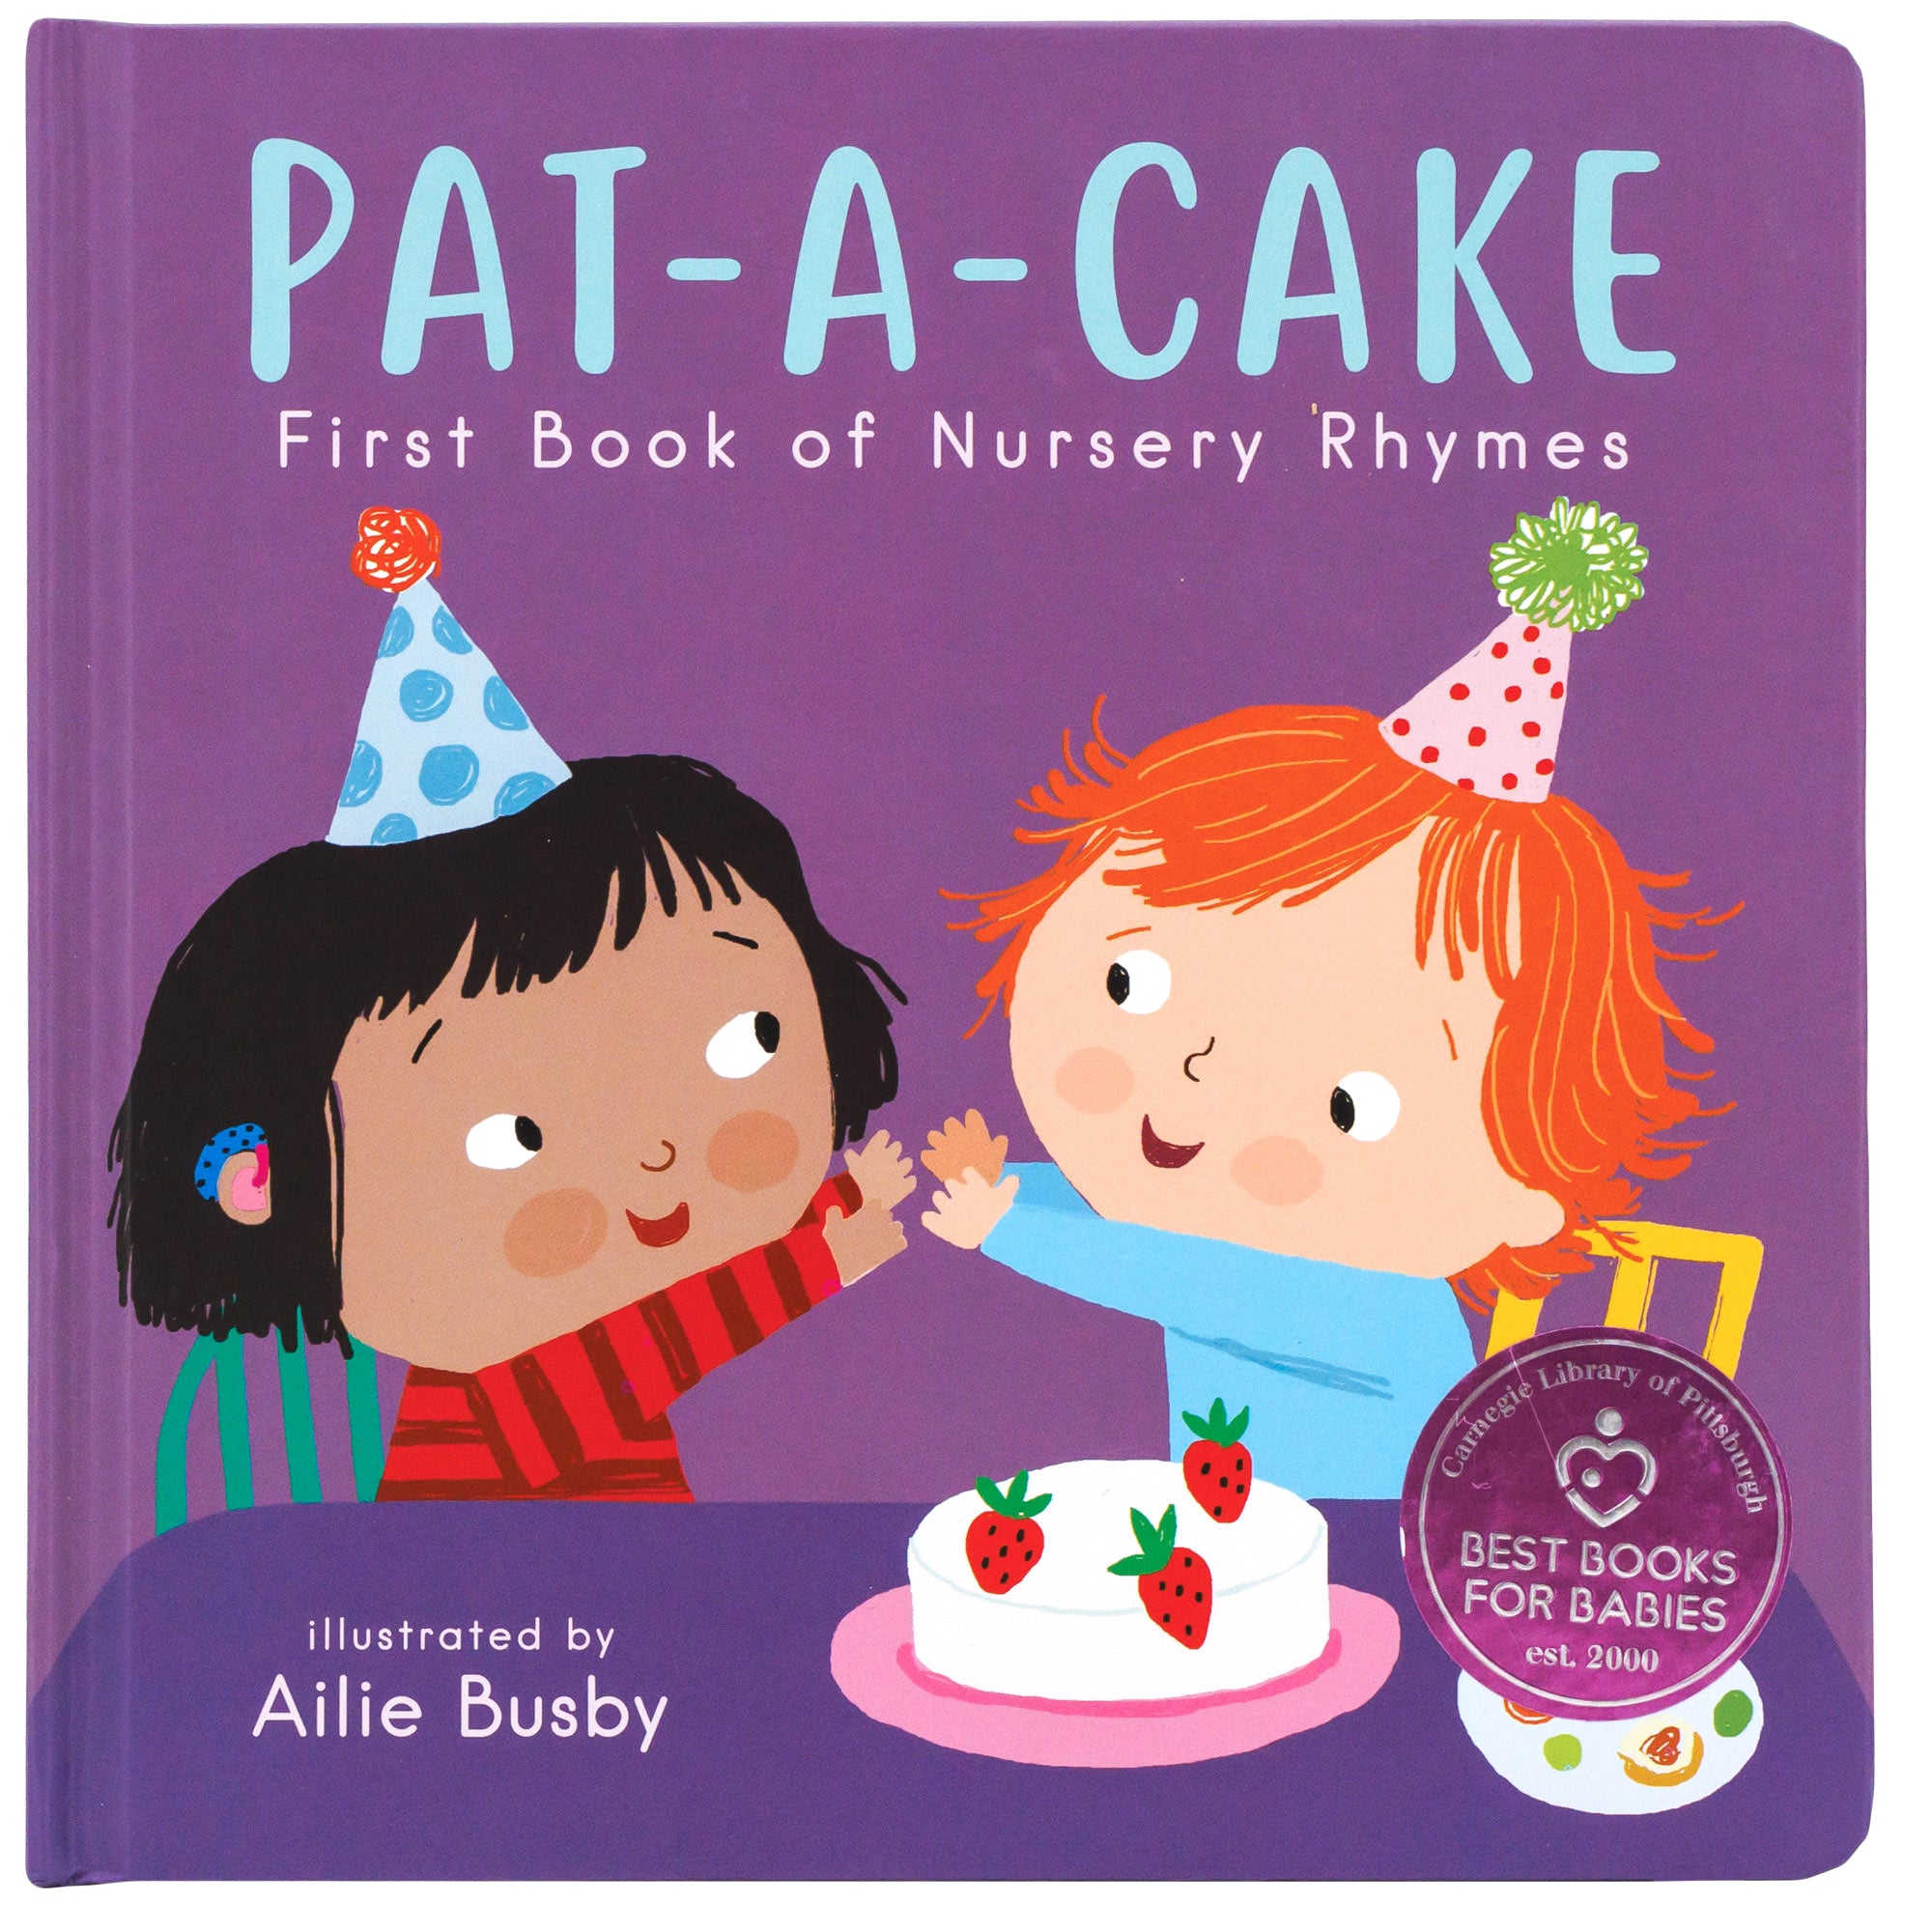 Pat-a-Cake, first book of nursery rhymes book cover. Cover has purple background with 2 children sitting at a table playing pat-a-cake with a strawberry-topped white cake on the table.